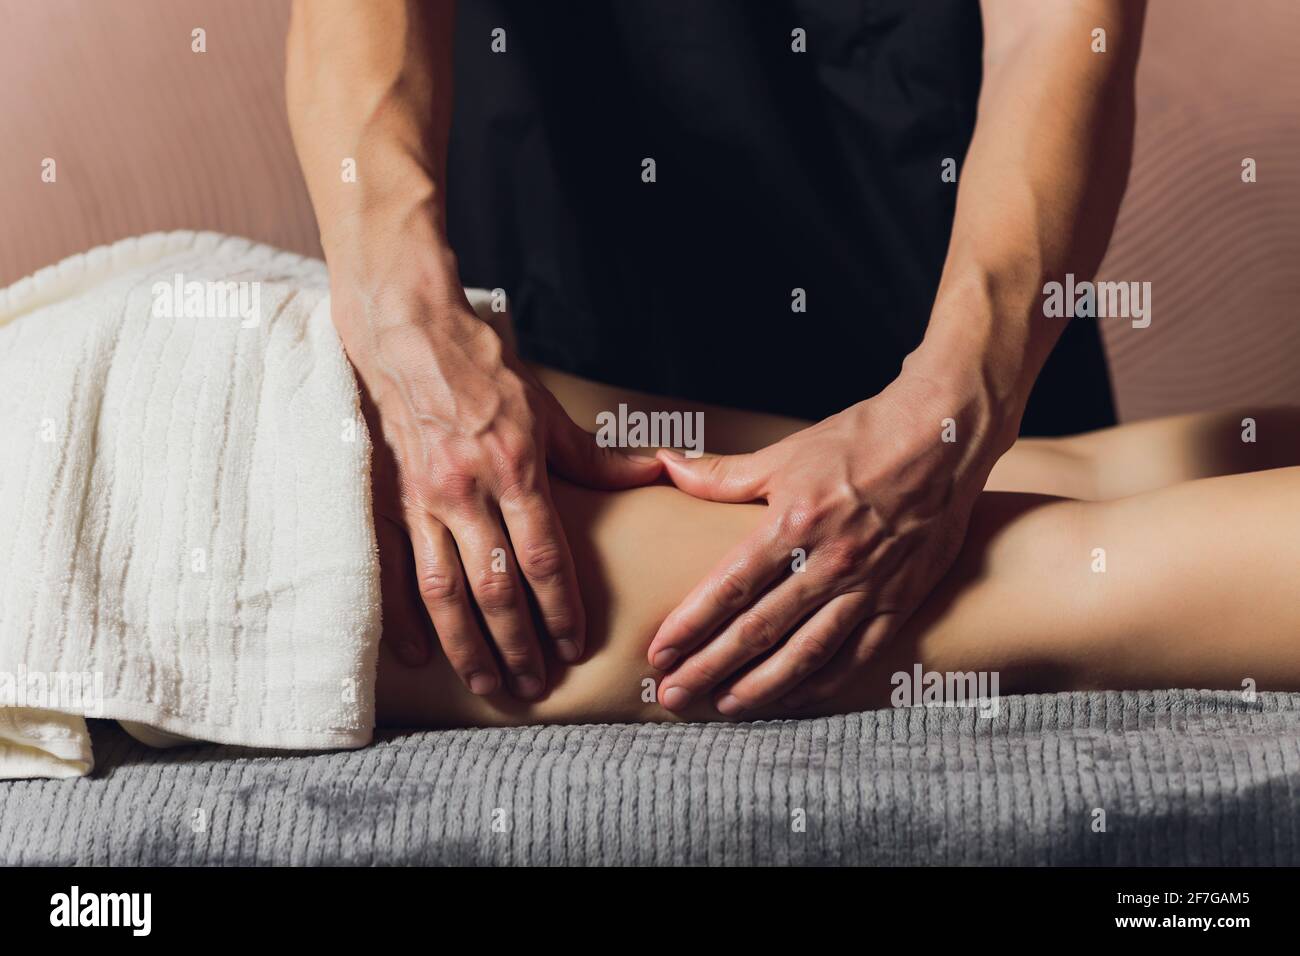 A foot massage being carried out in a spa by a masseuse Stock Photo